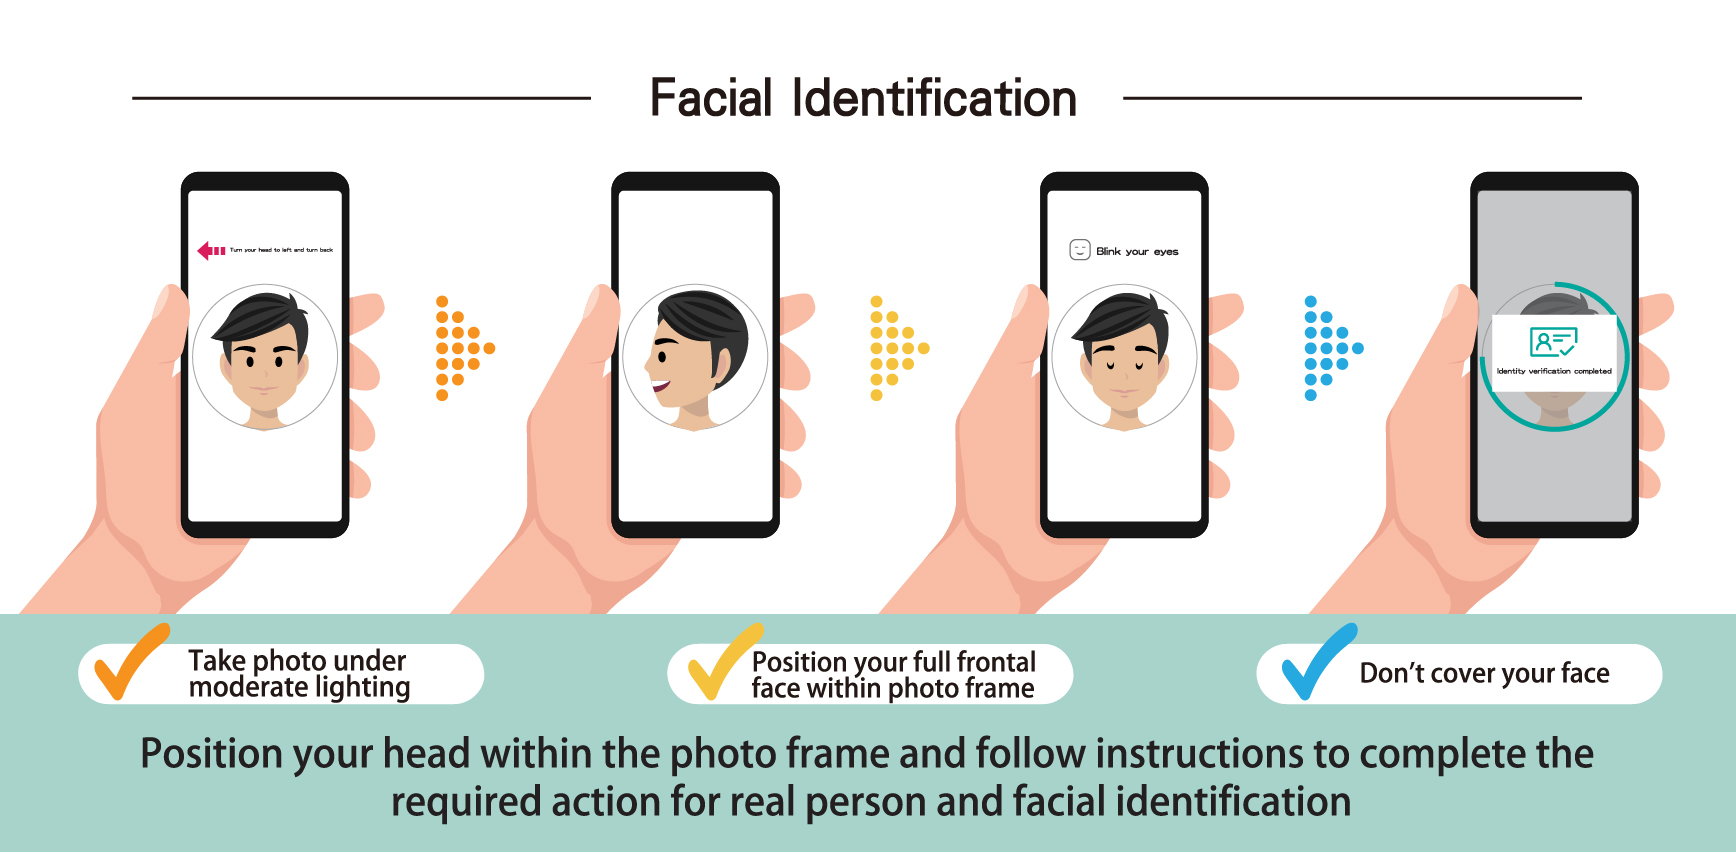 About the tips for facial identification, please position your head within the photo frame and follow instructions to complete the required action for person and facial identification. Take photo under moderate lighting, position your full frontal face within photo frame and don't cover your face